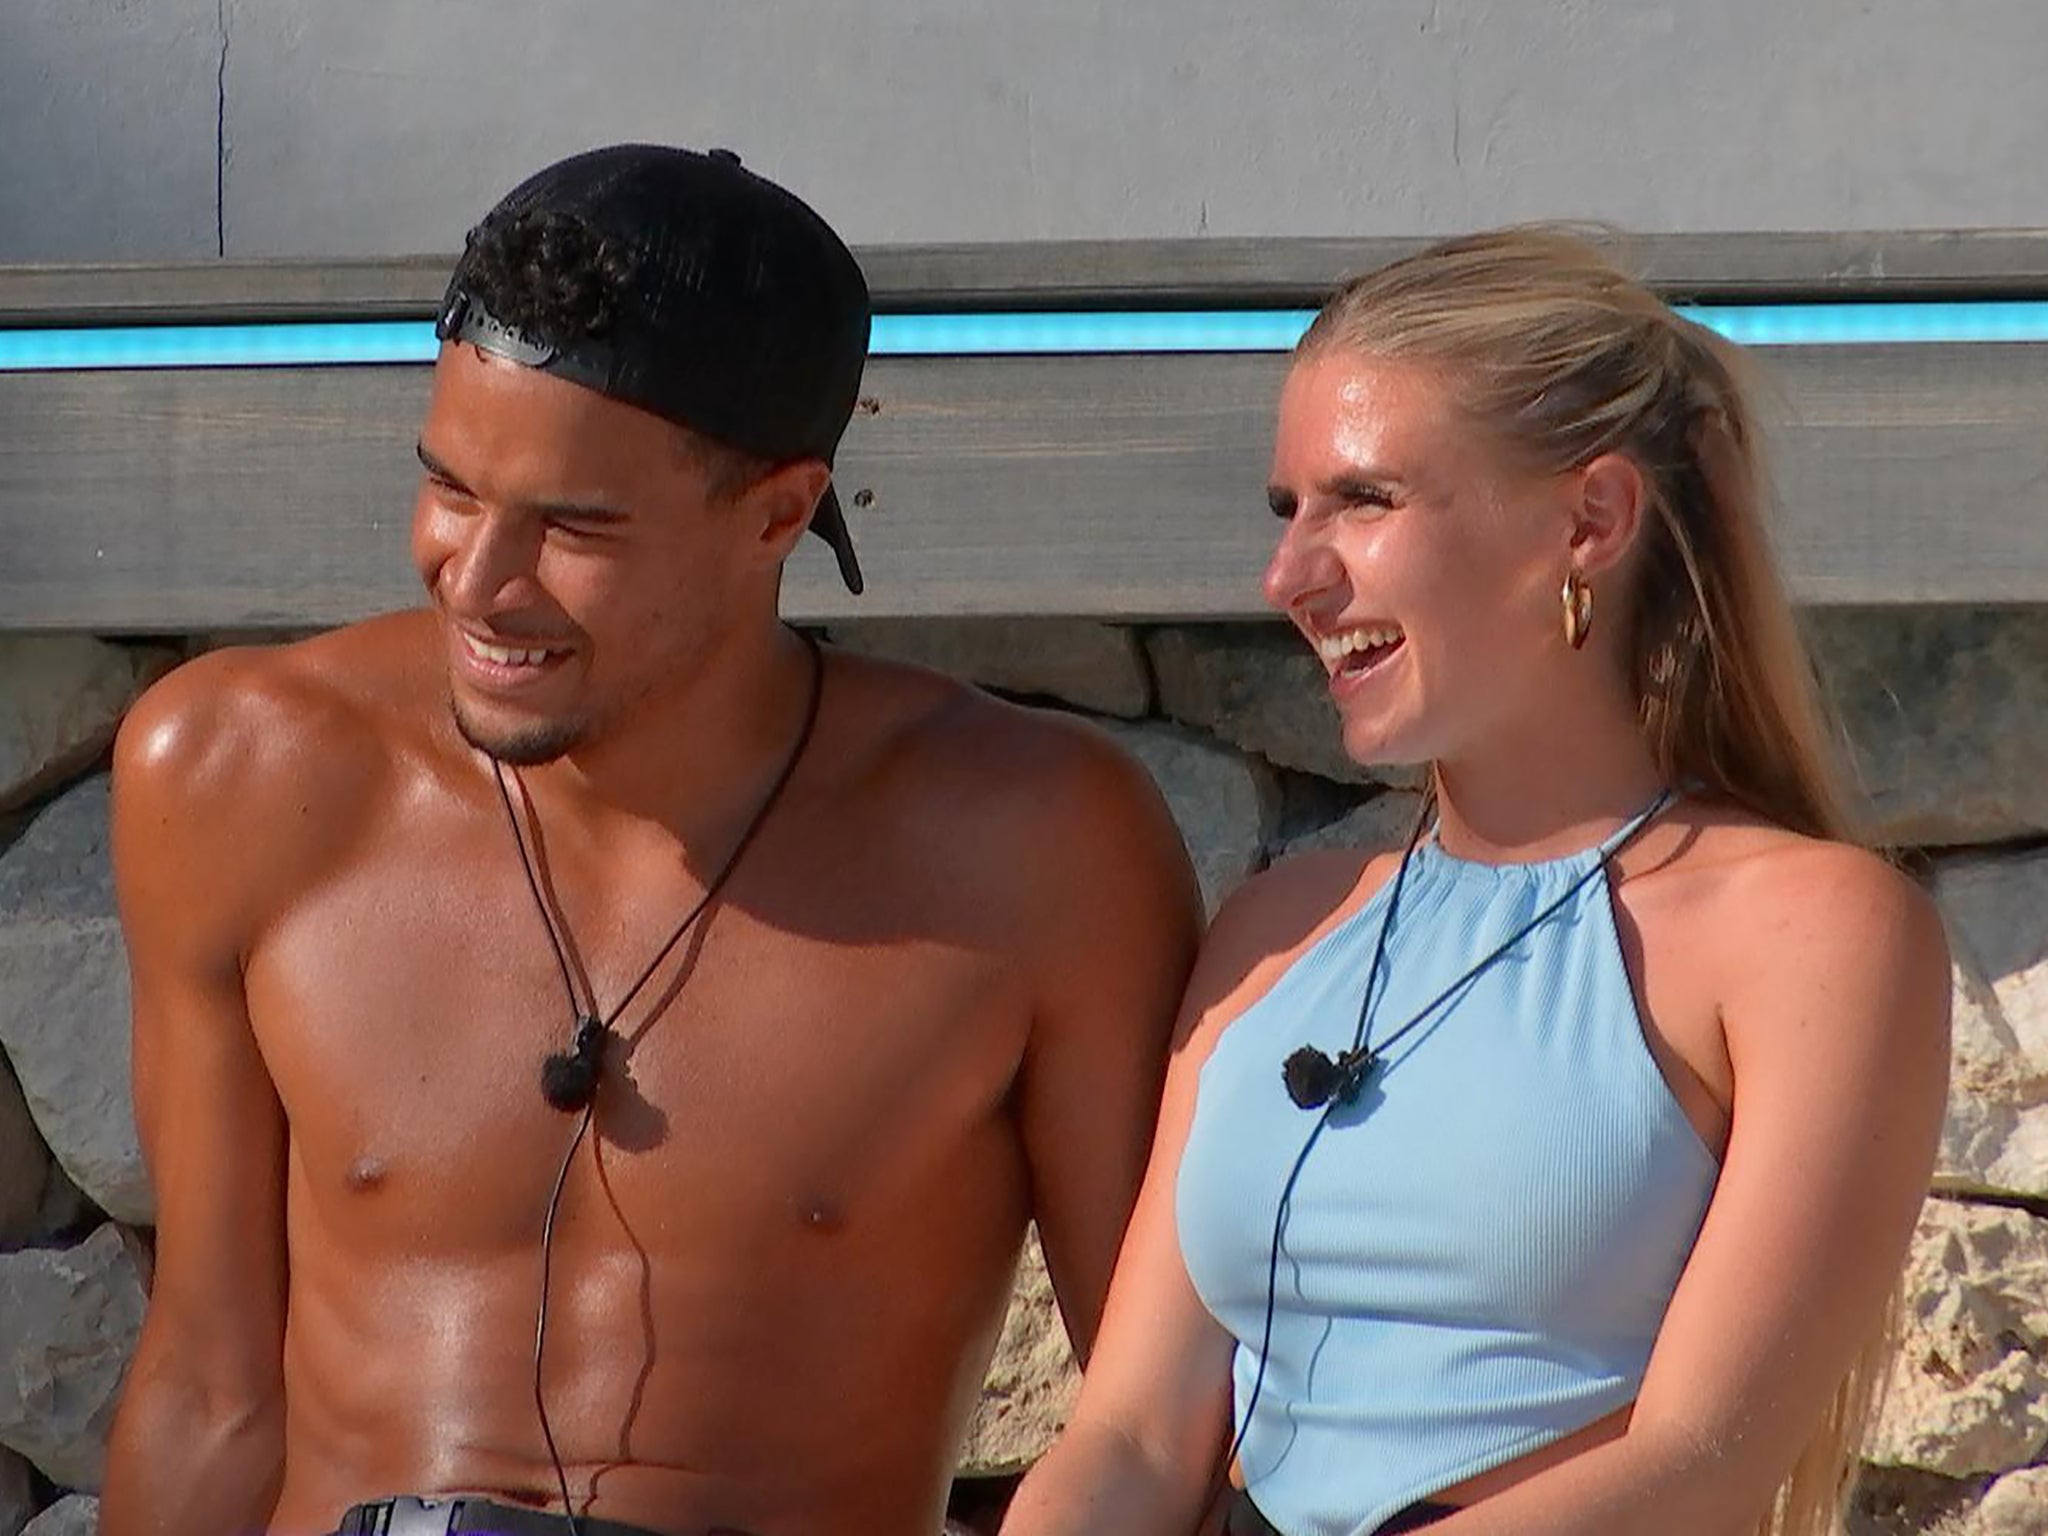 Toby and Chloe may take the winning prize on ‘Love Island’ tonight